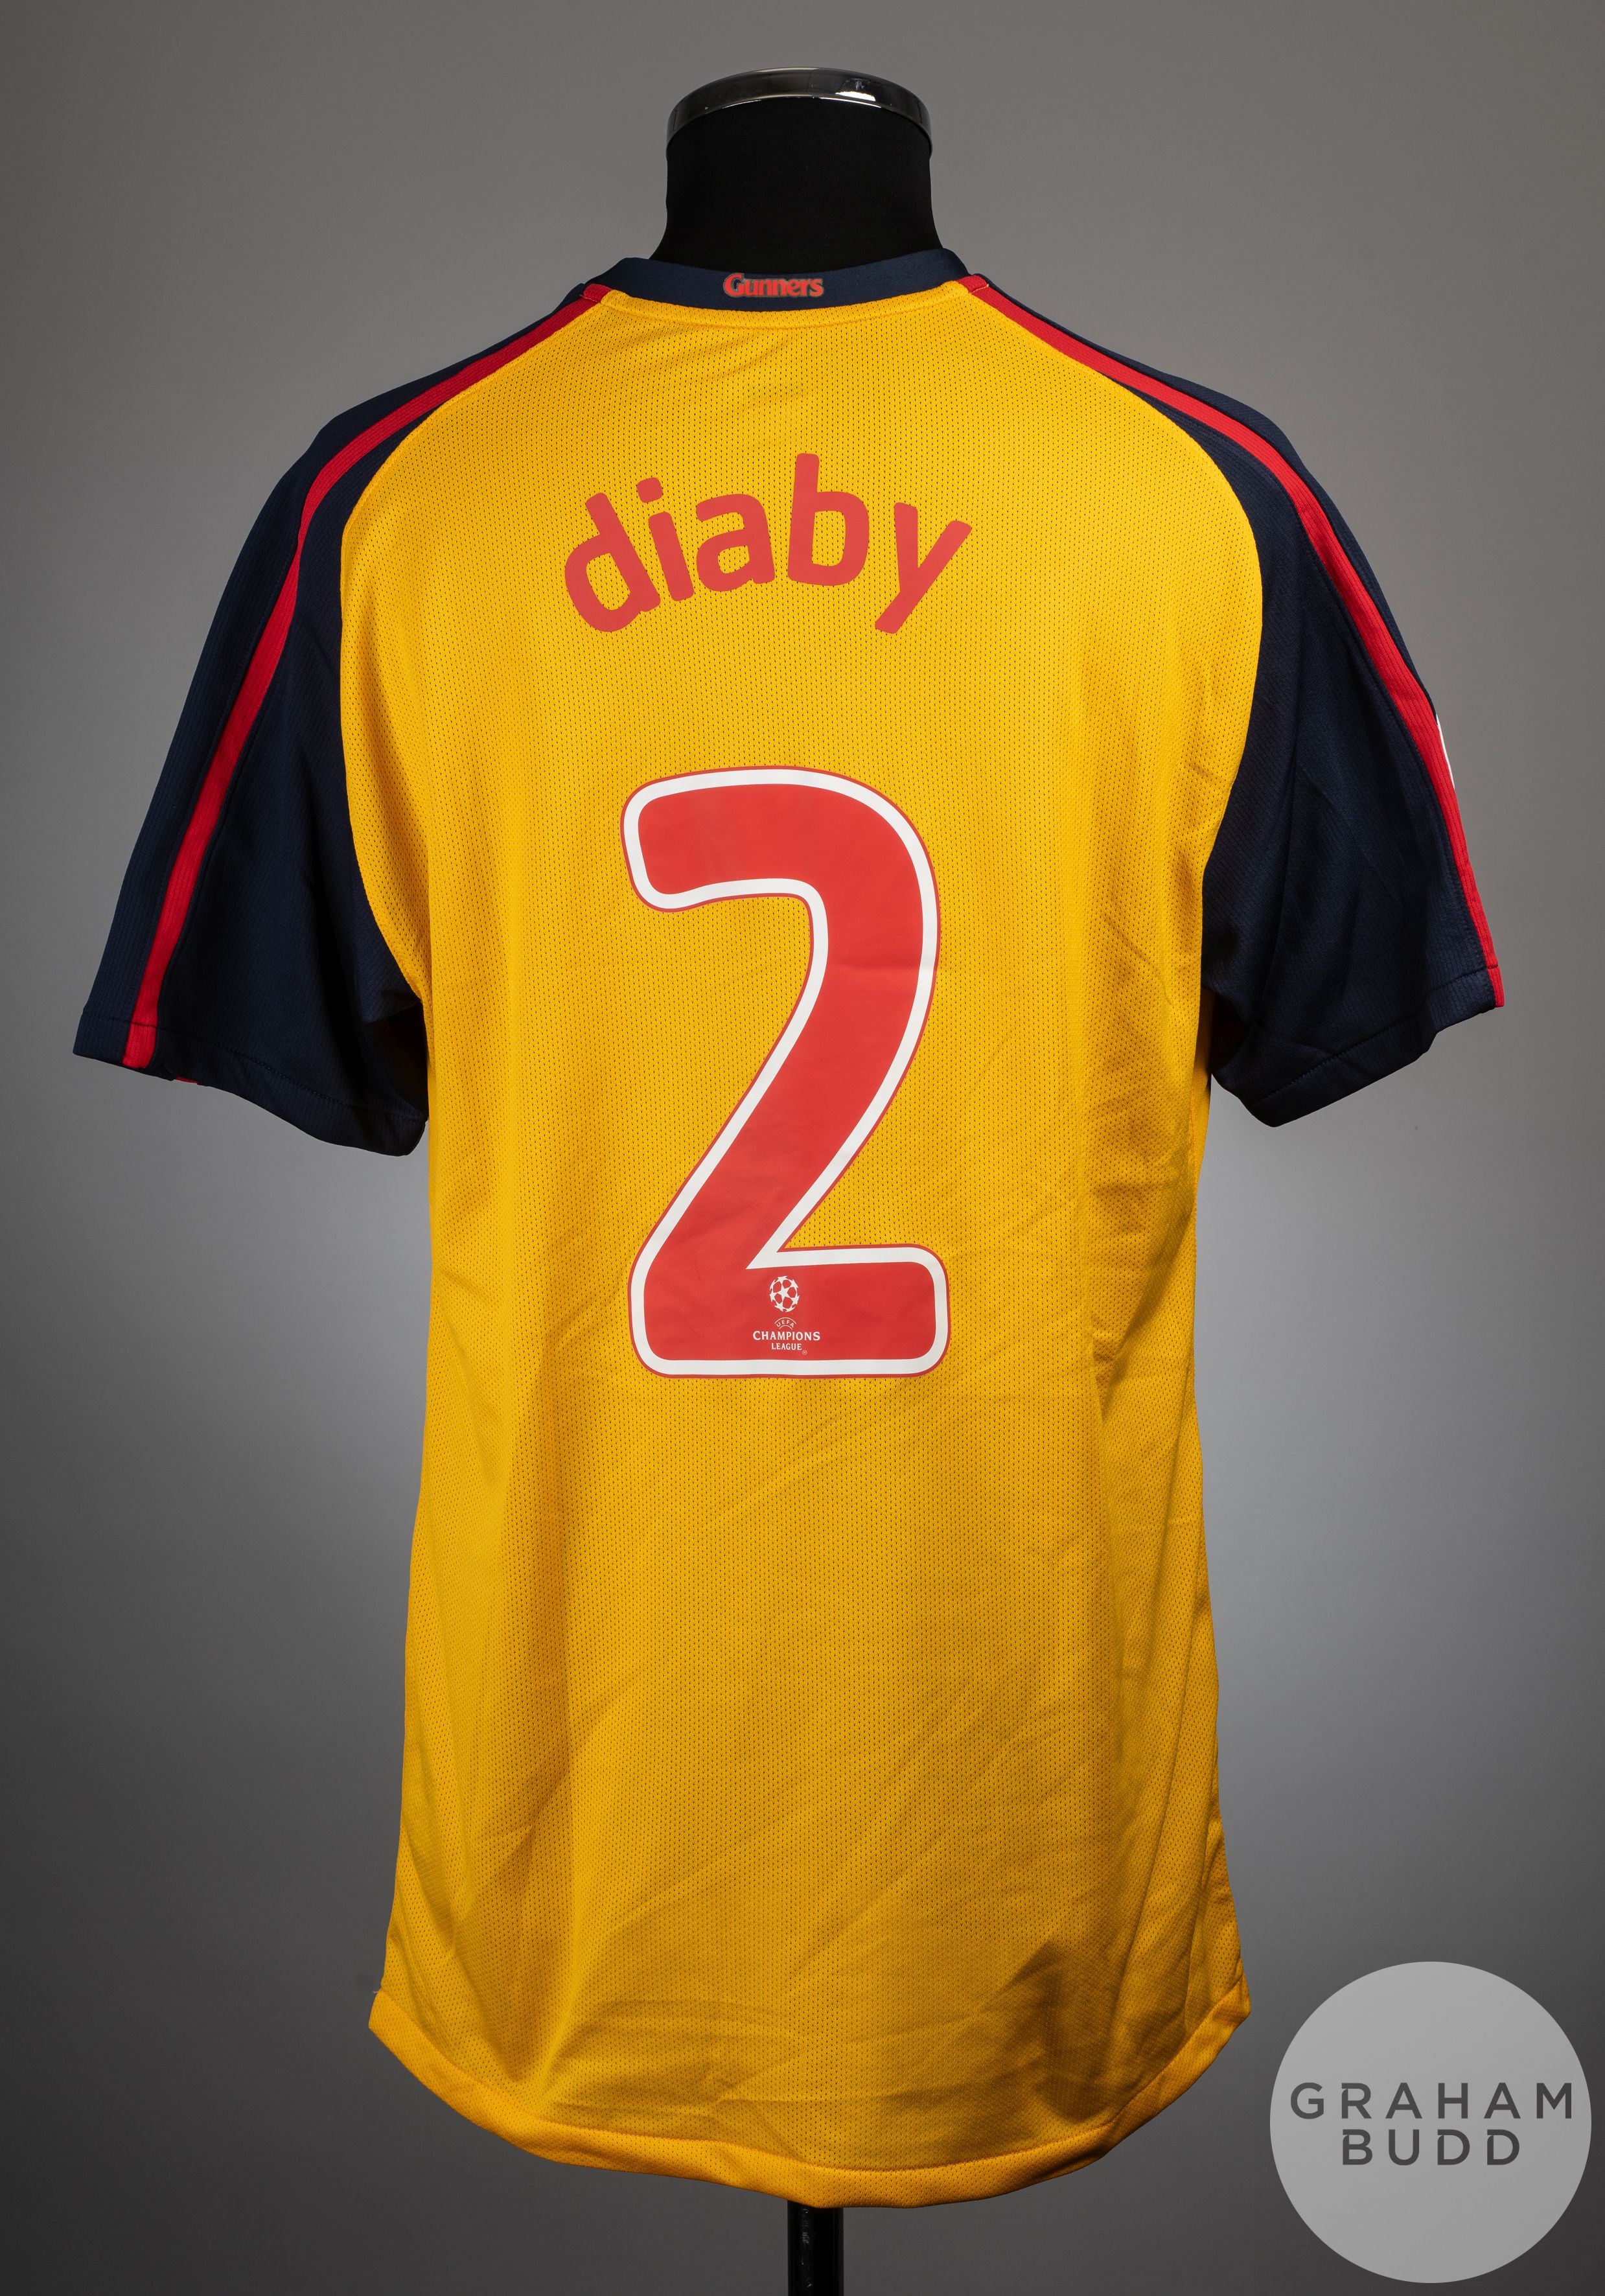 Abou Diaby yellow No.2 Arsenal v. Manchester United match worn shirt, 2008-09 - Image 2 of 2